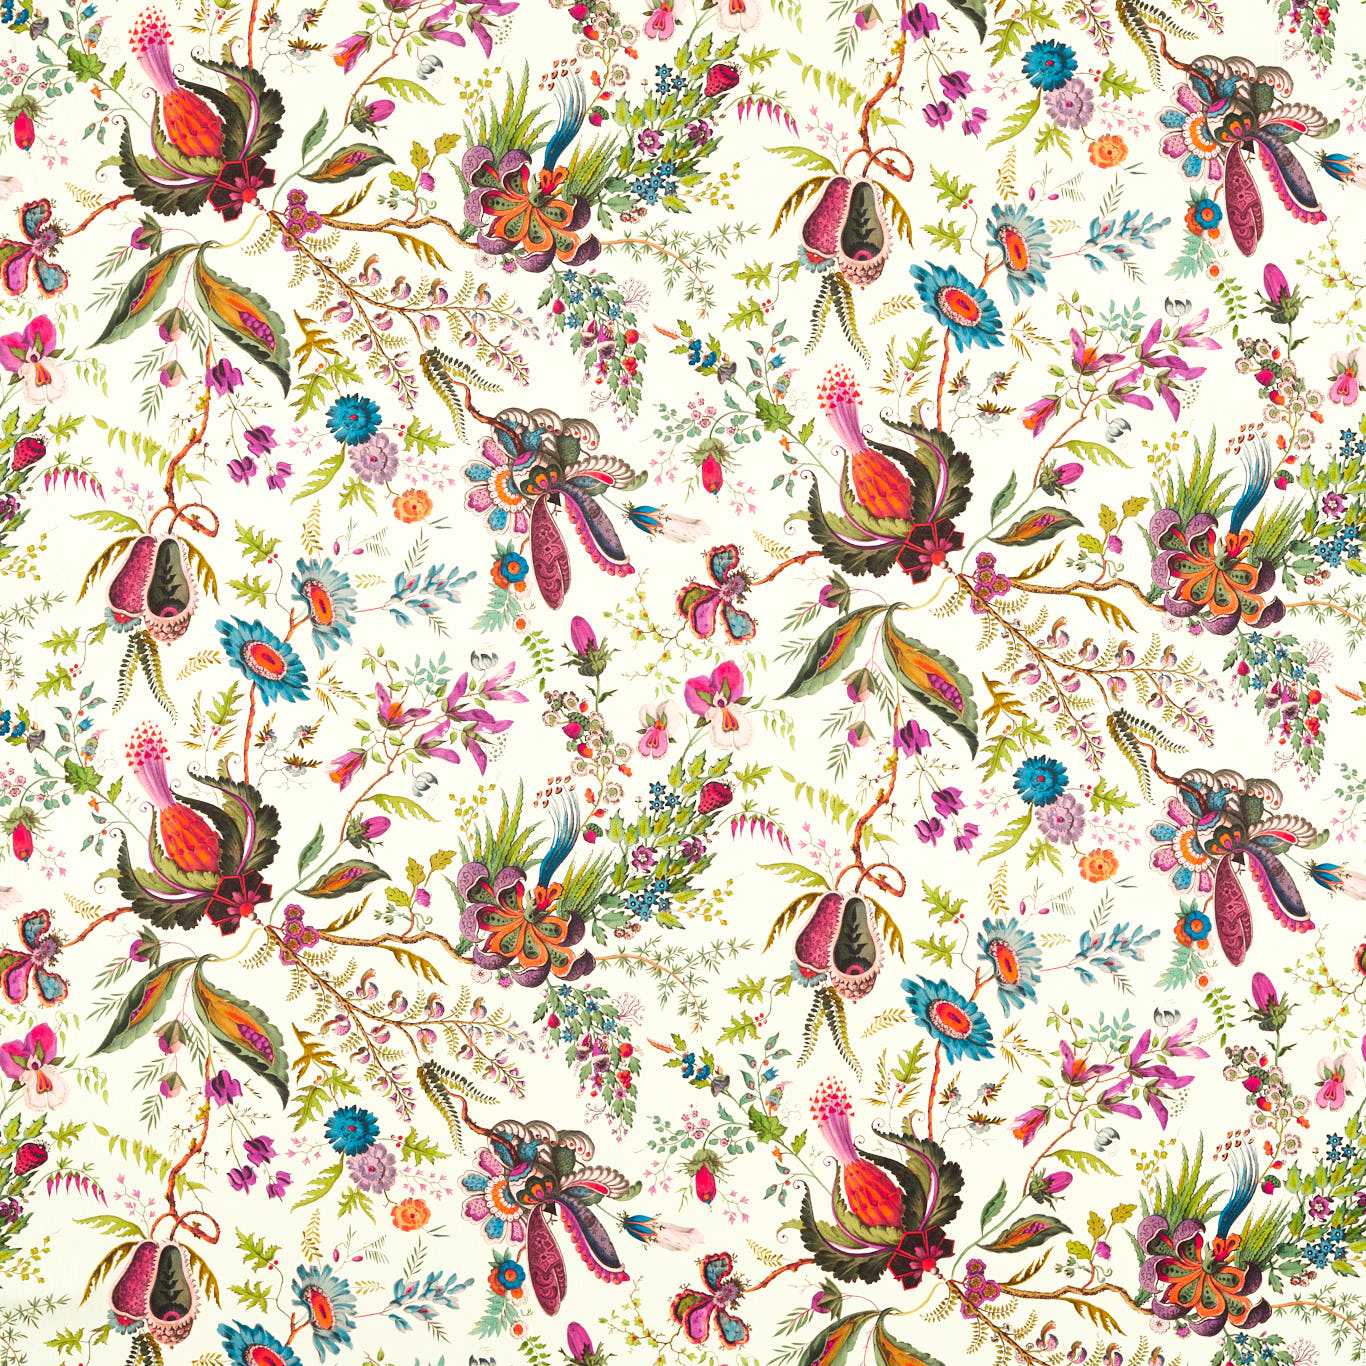 Wonderland Floral Spinel/Peridot/Pearl Fabric by HAR